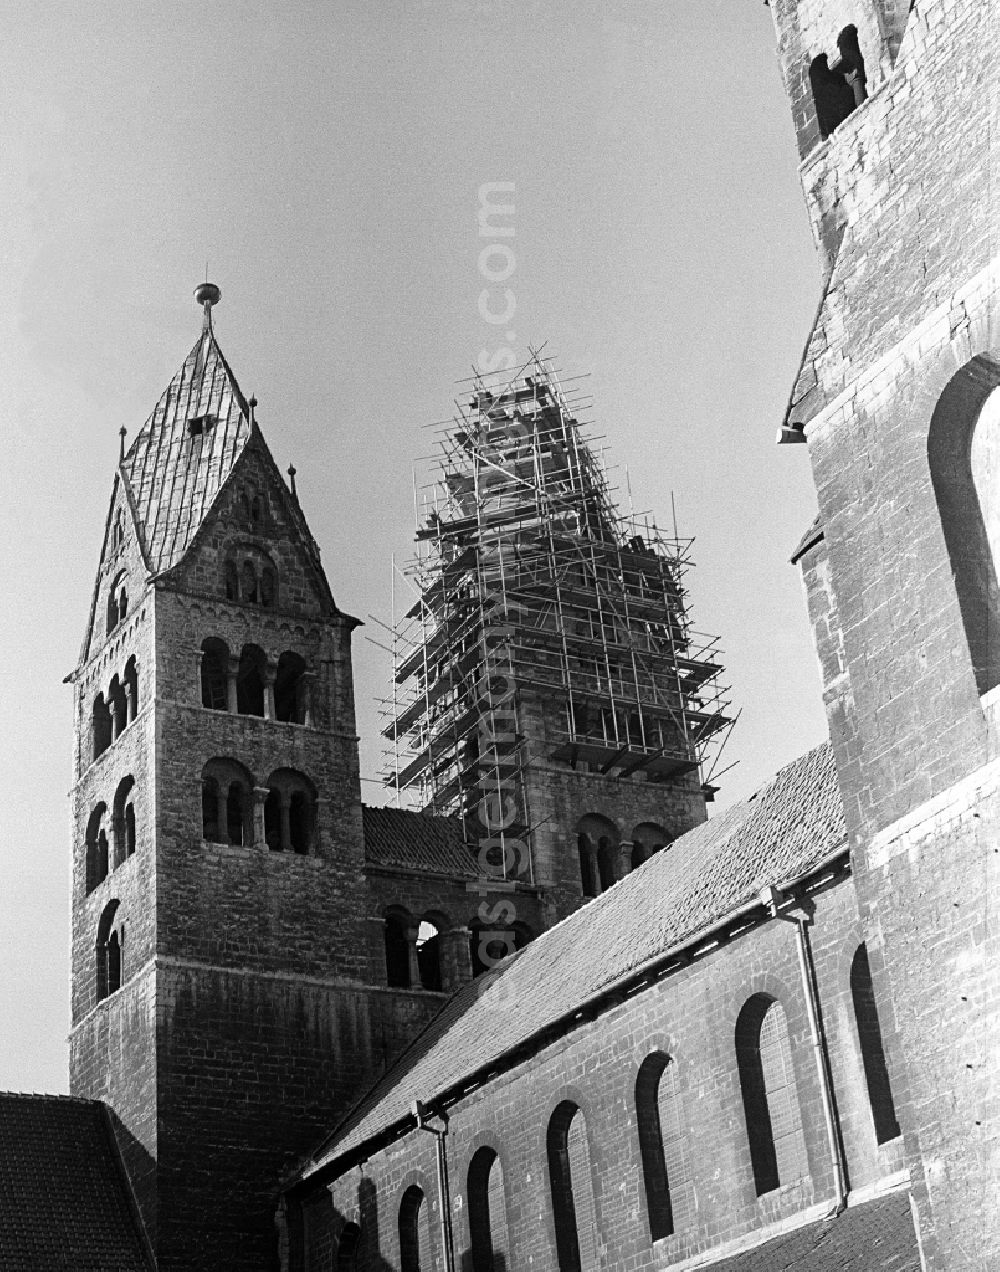 GDR image archive: Halberstadt - Restauration of bell tower of the sacred building of the church Liebfrauenkirche in Halberstadt in the state Saxony-Anhalt on the territory of the former GDR, German Democratic Republic